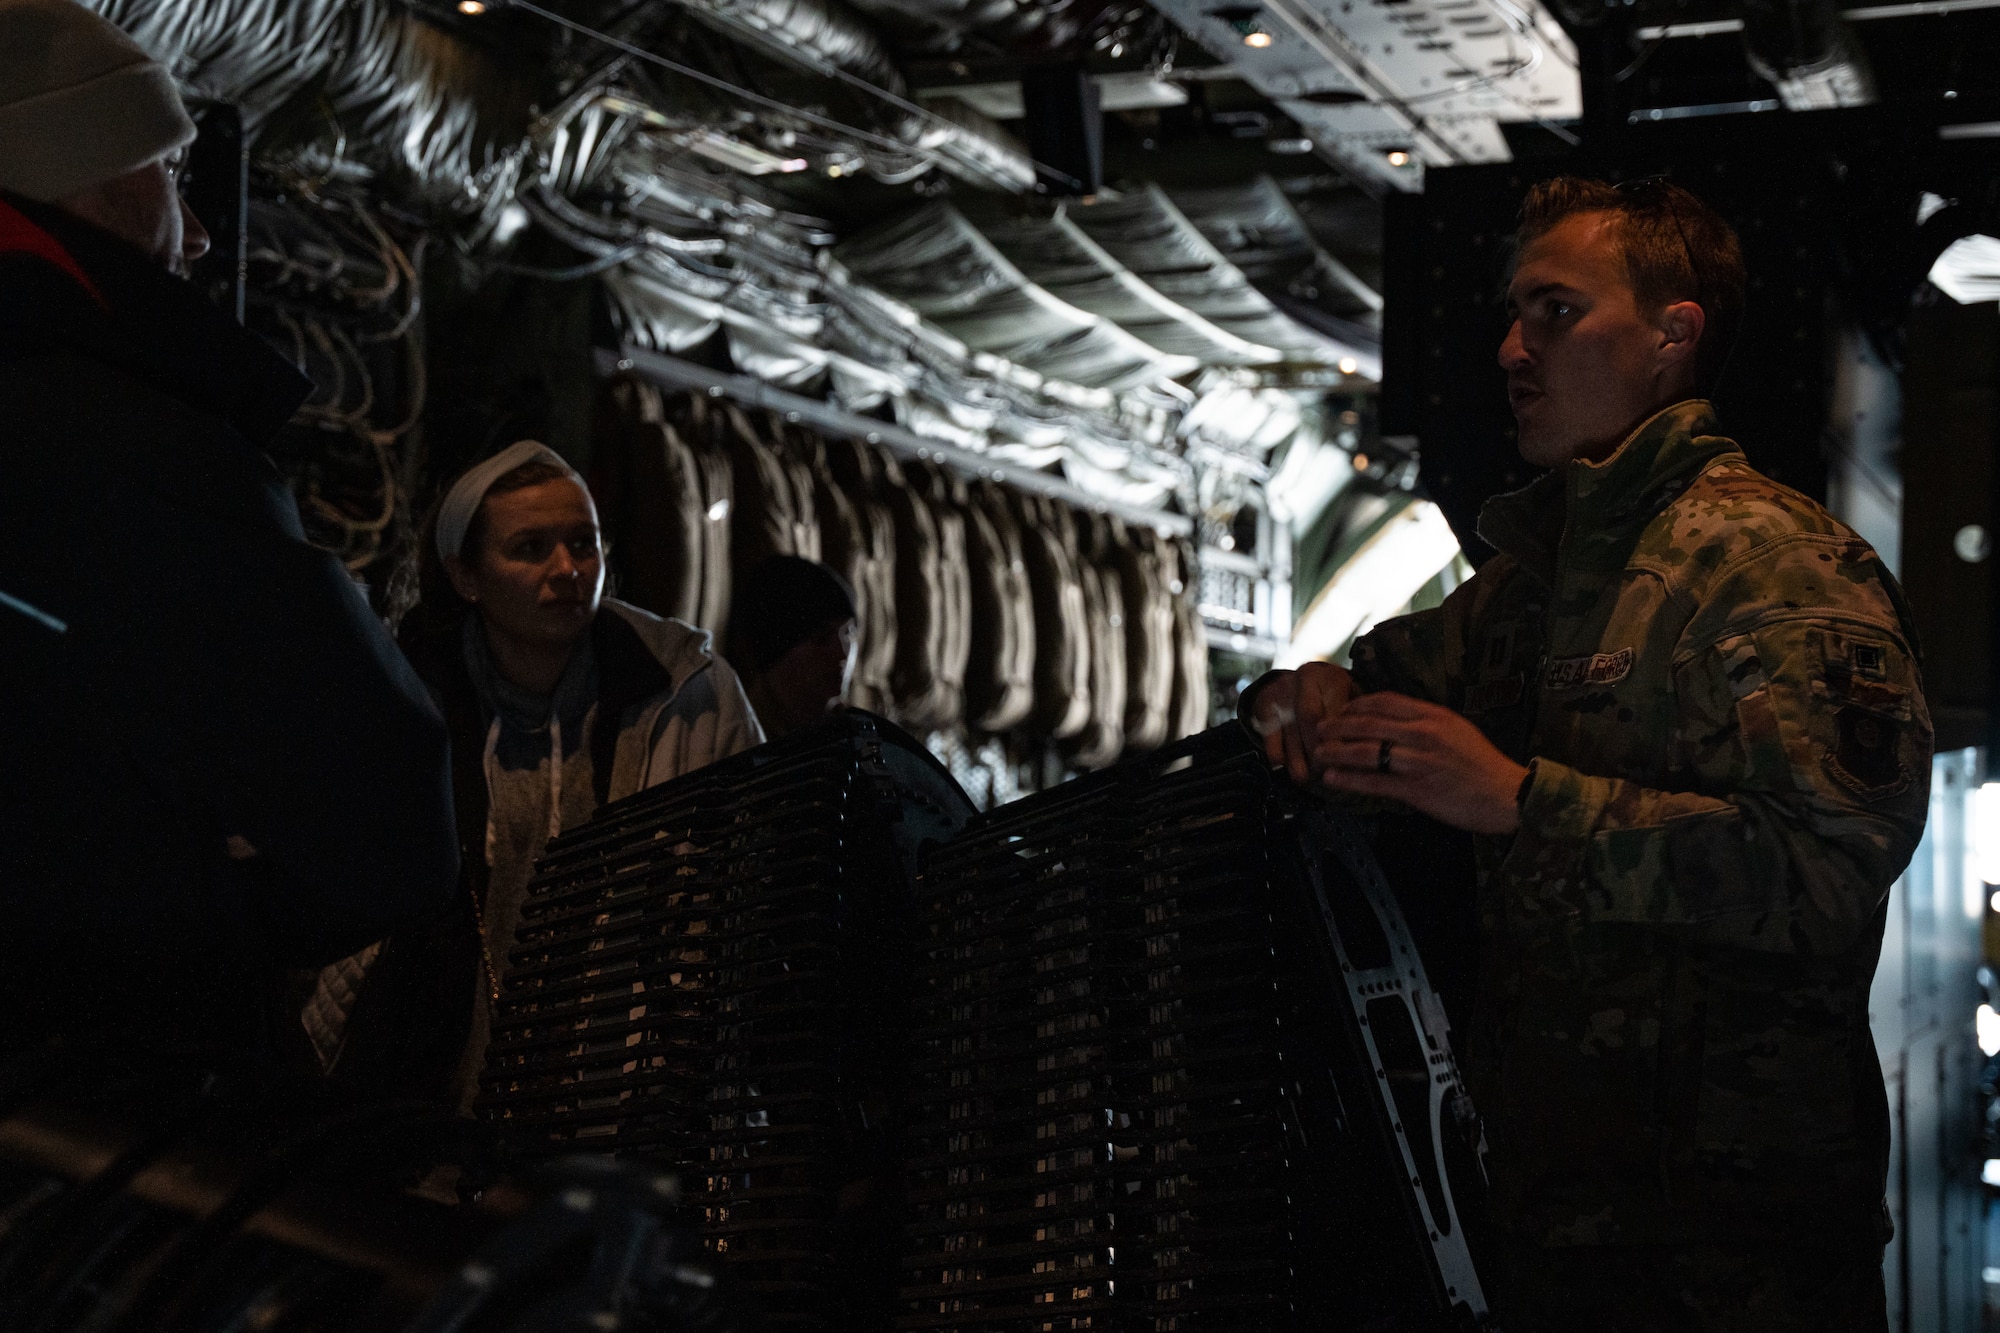 A man in military uniform speaks to a group of young adults in military uniform while holding a piece of equipment inside a military aircraft.